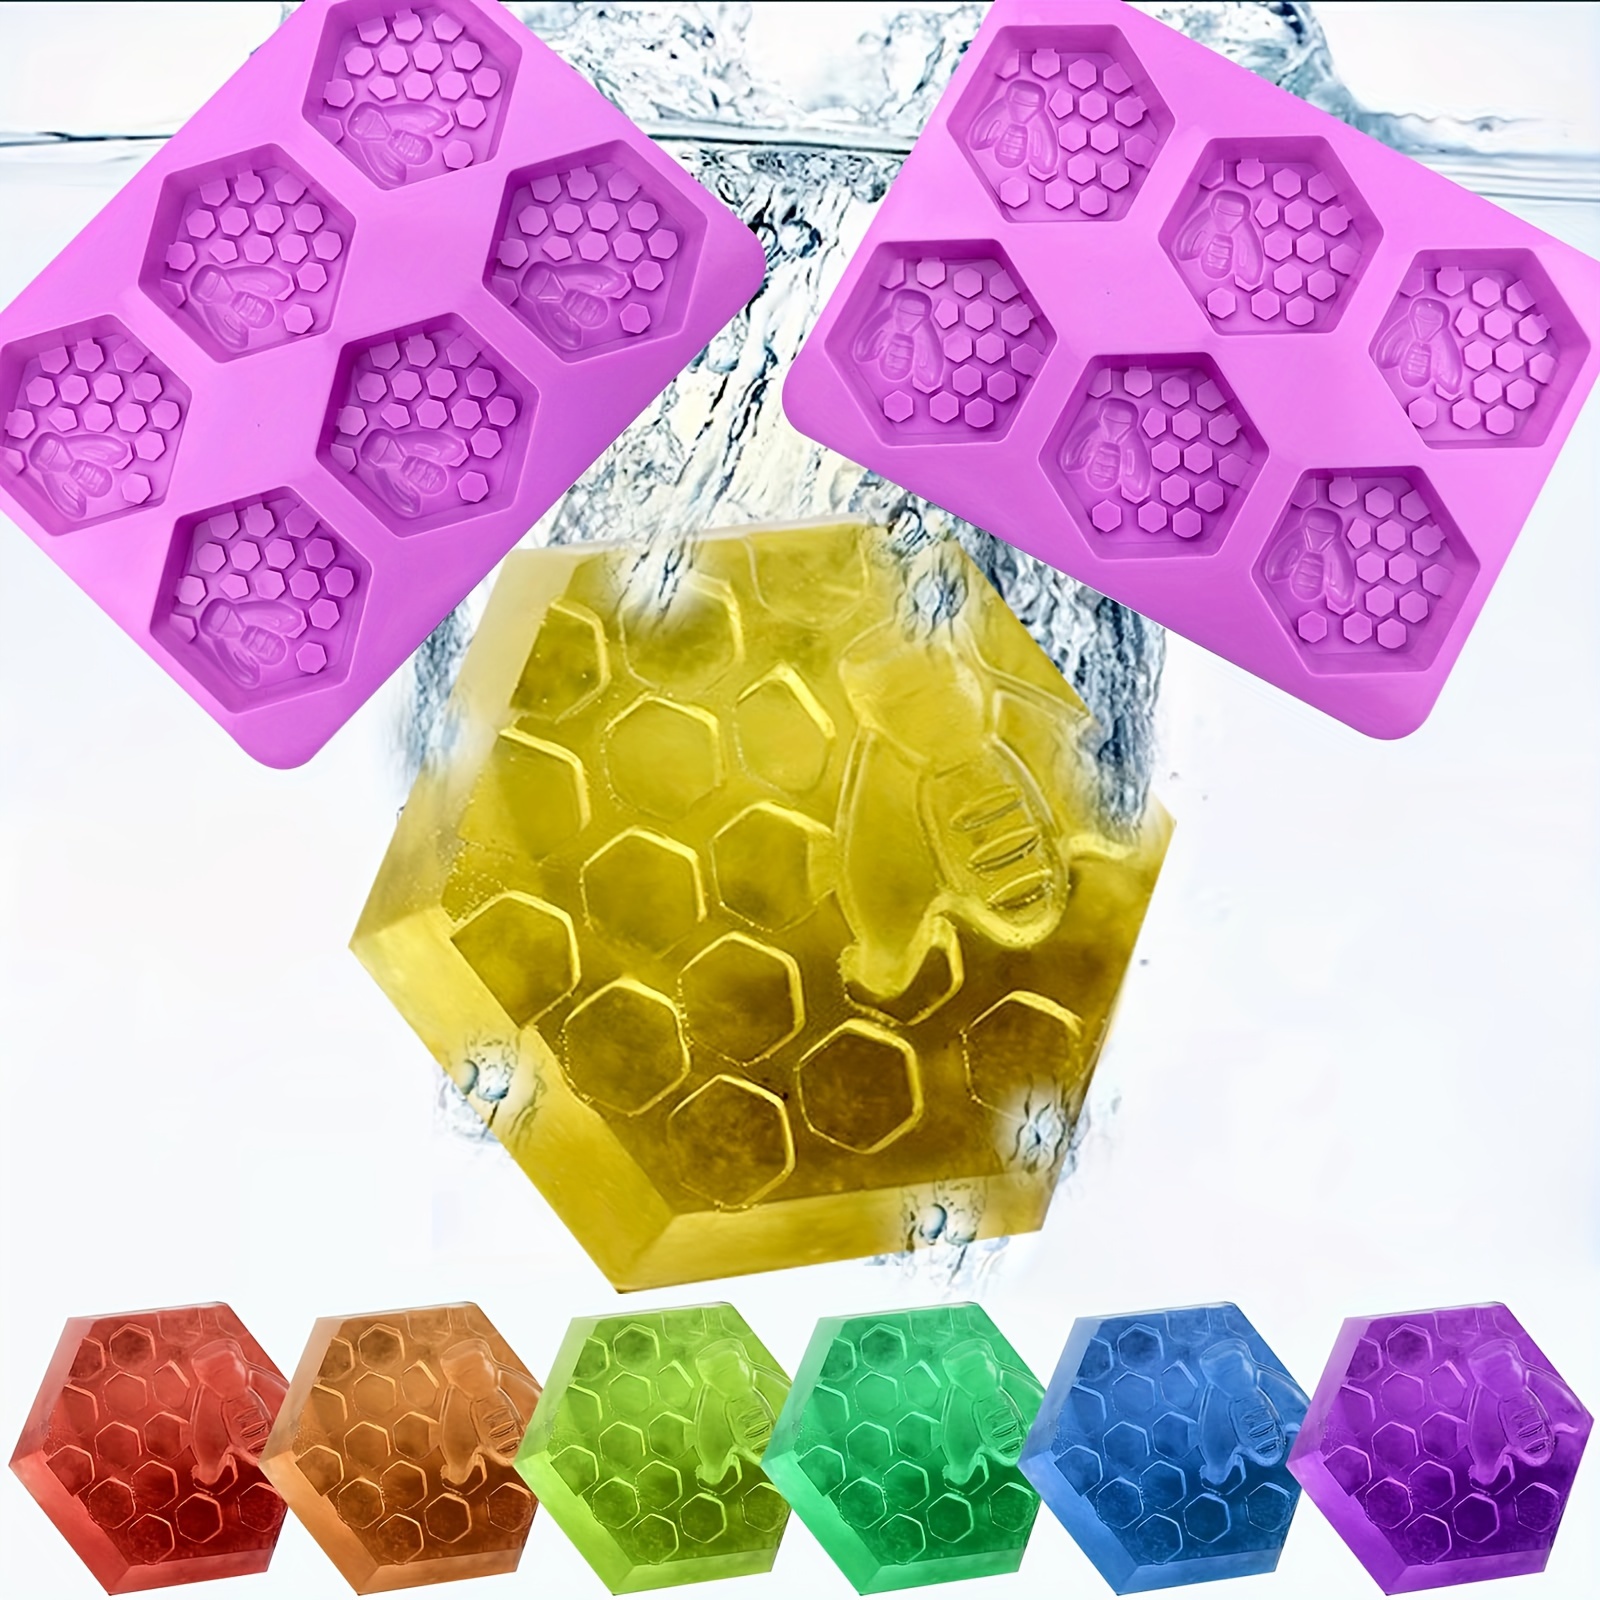 3d Silicone Molds, Honeycomb Mold For Soaps, Candle Mold Resin Mold For  Homemade Craft Rectangular Oval Silicone Handmade Soap Molds